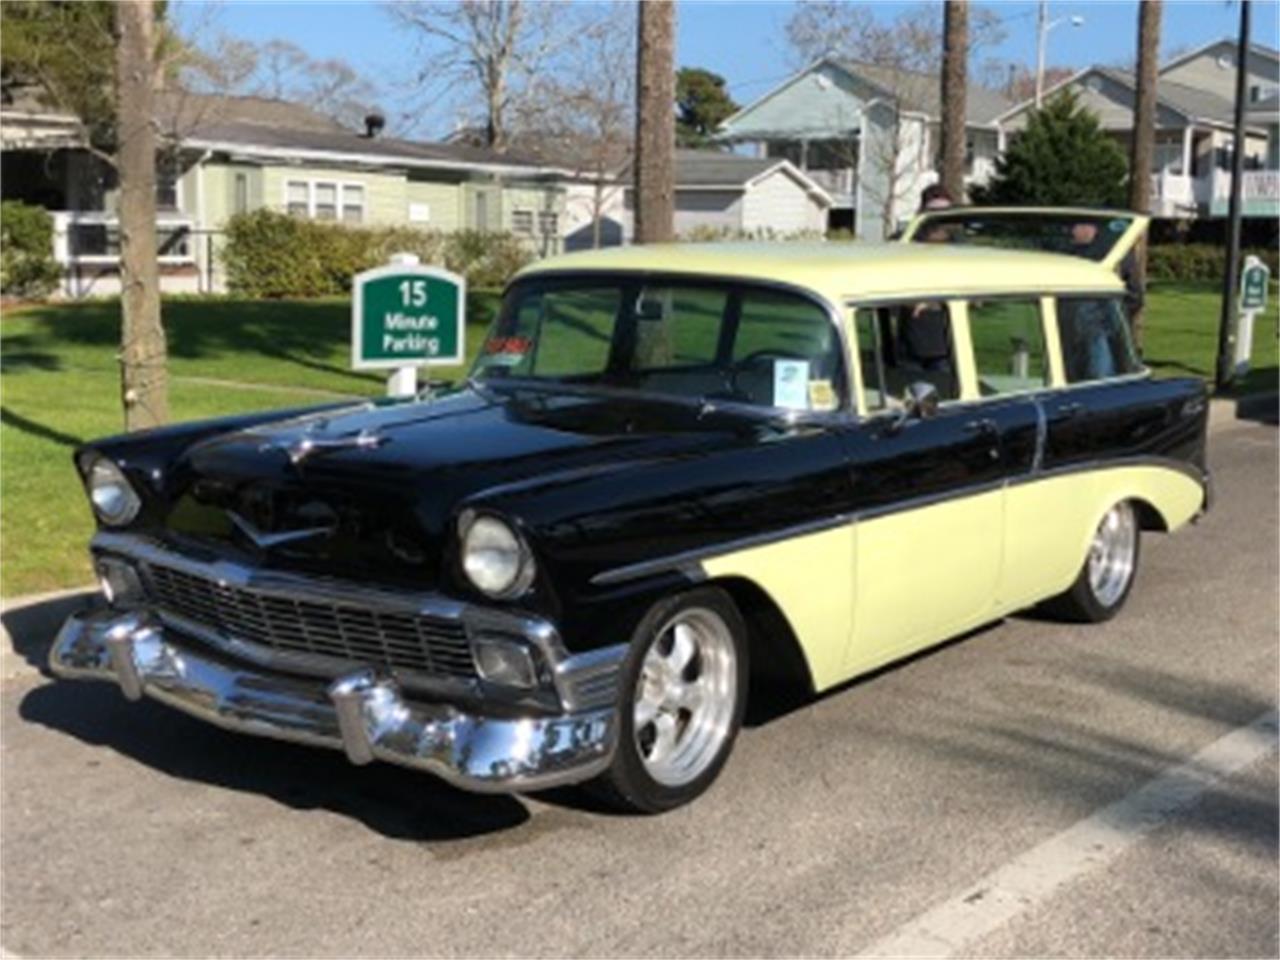 Yellow/Black 1956 Chevrolet Station Wagon for sale located in Mundelein, Il...